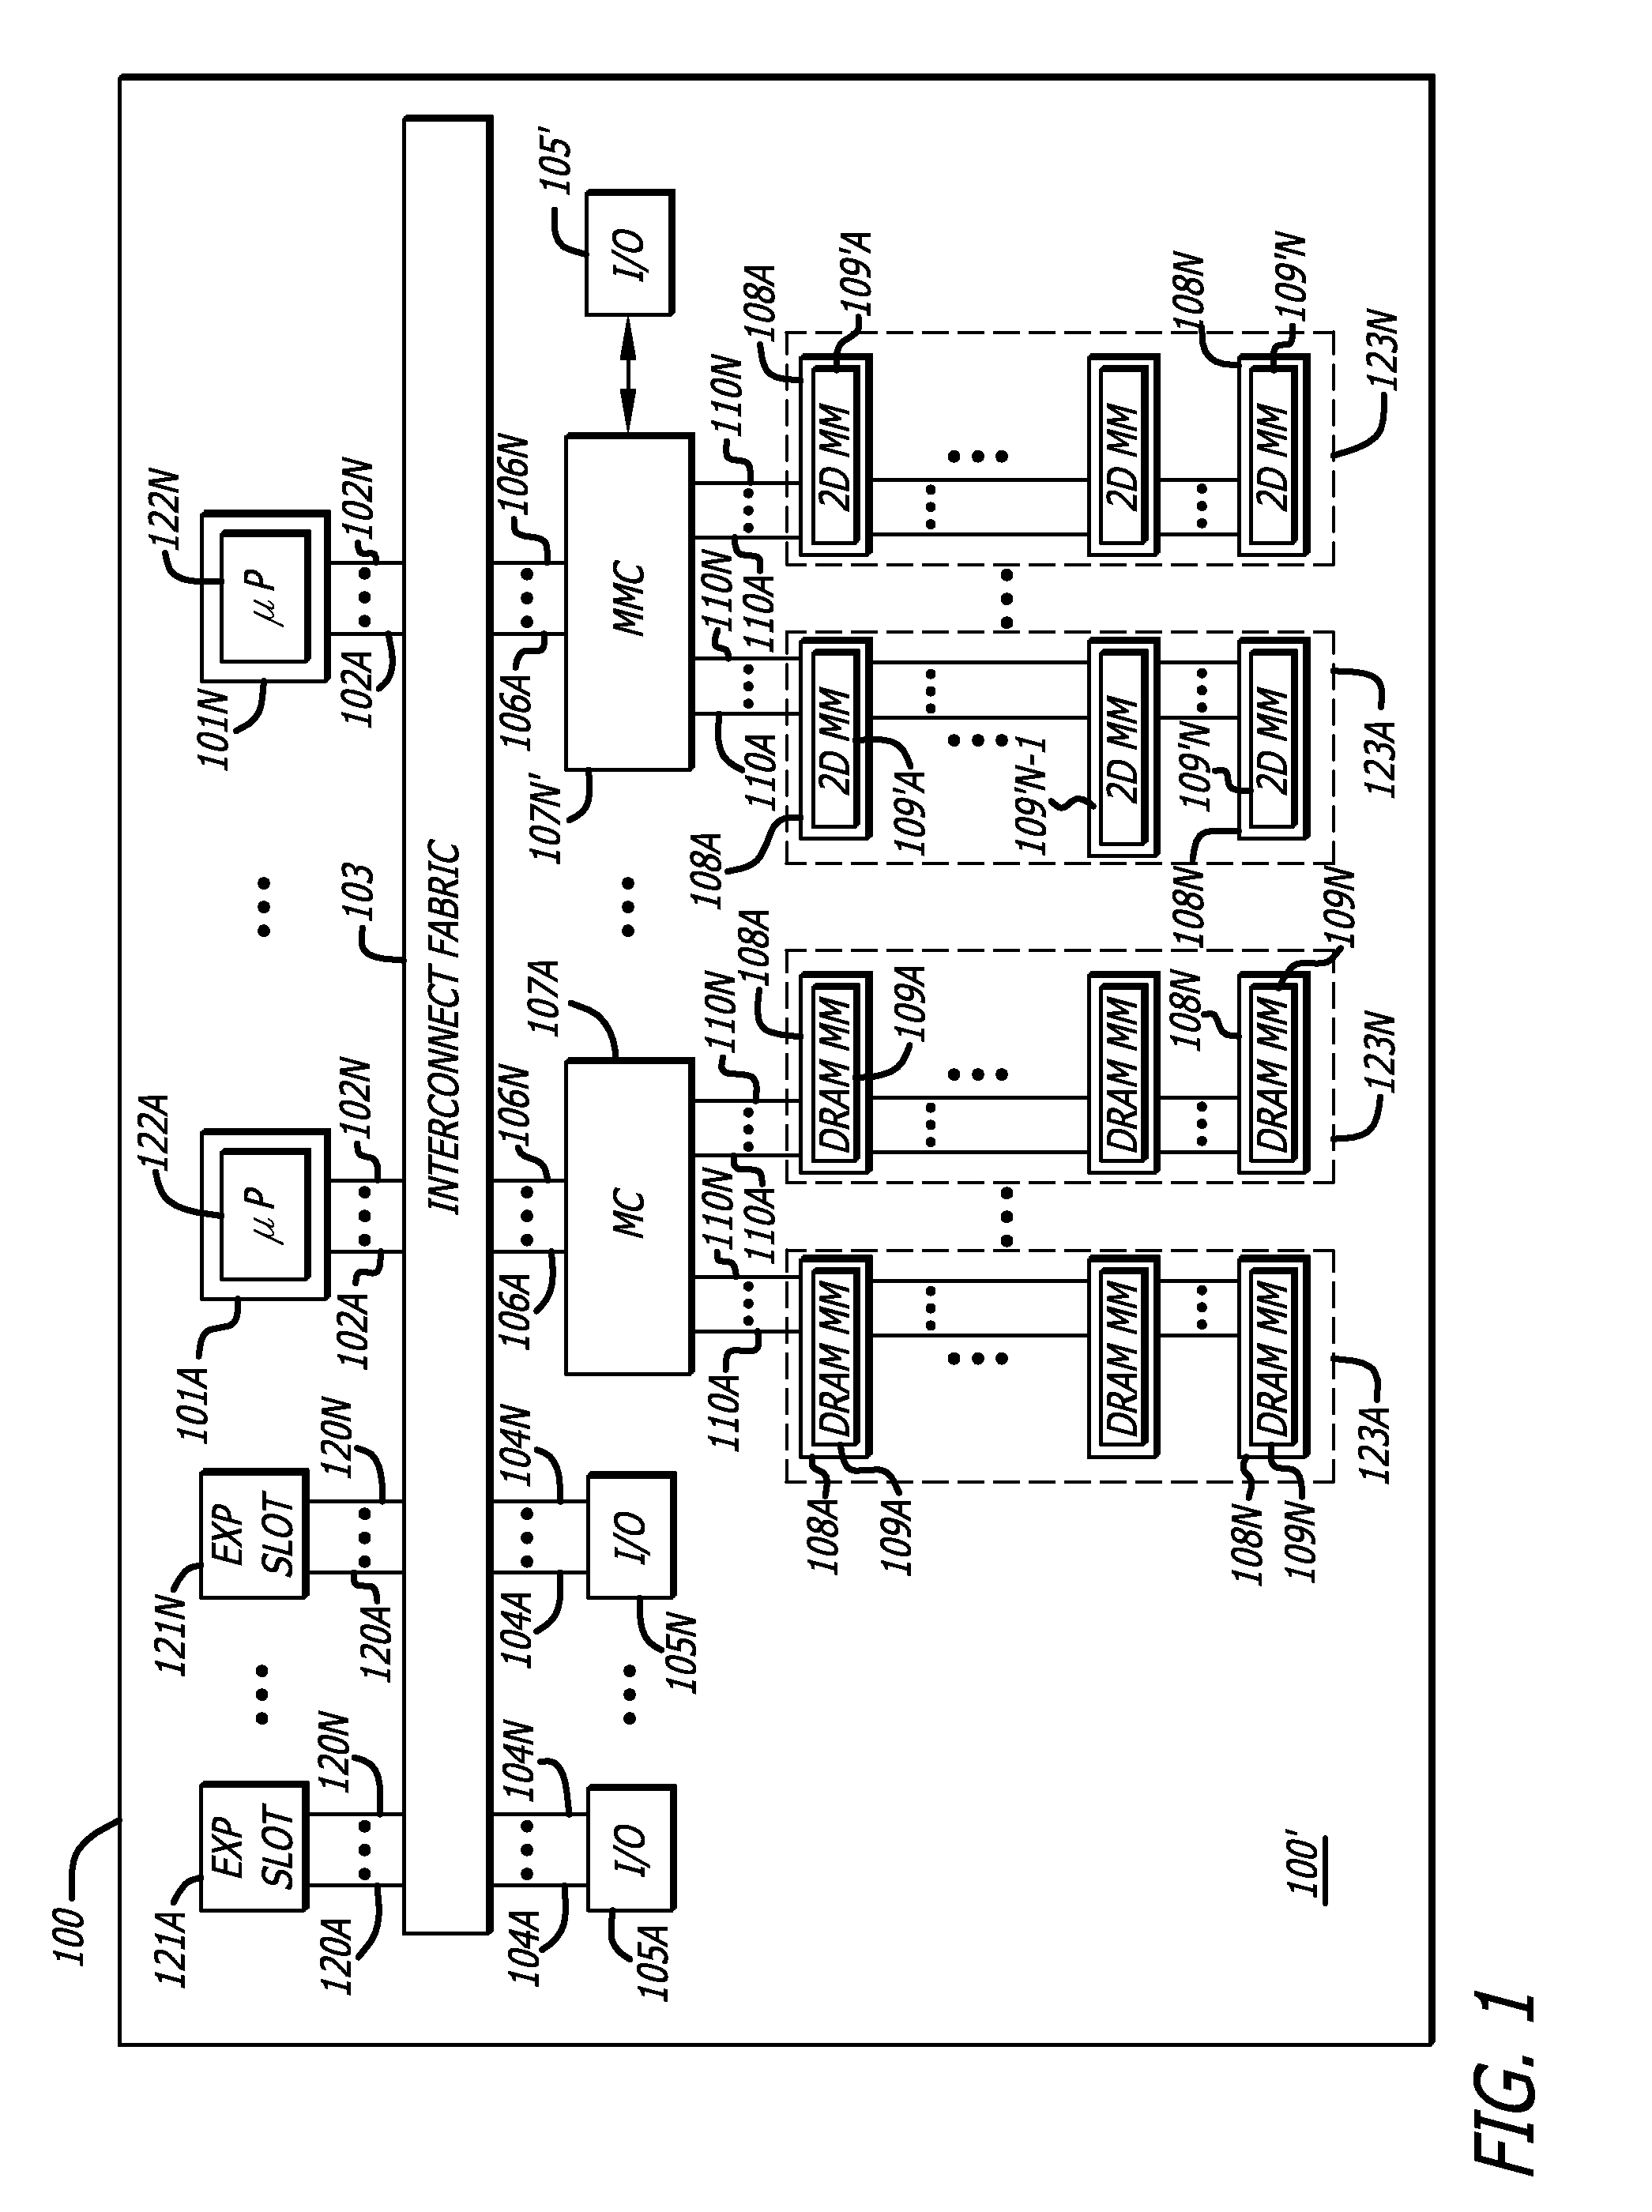 Methods and apparatus for two-dimensional main memory